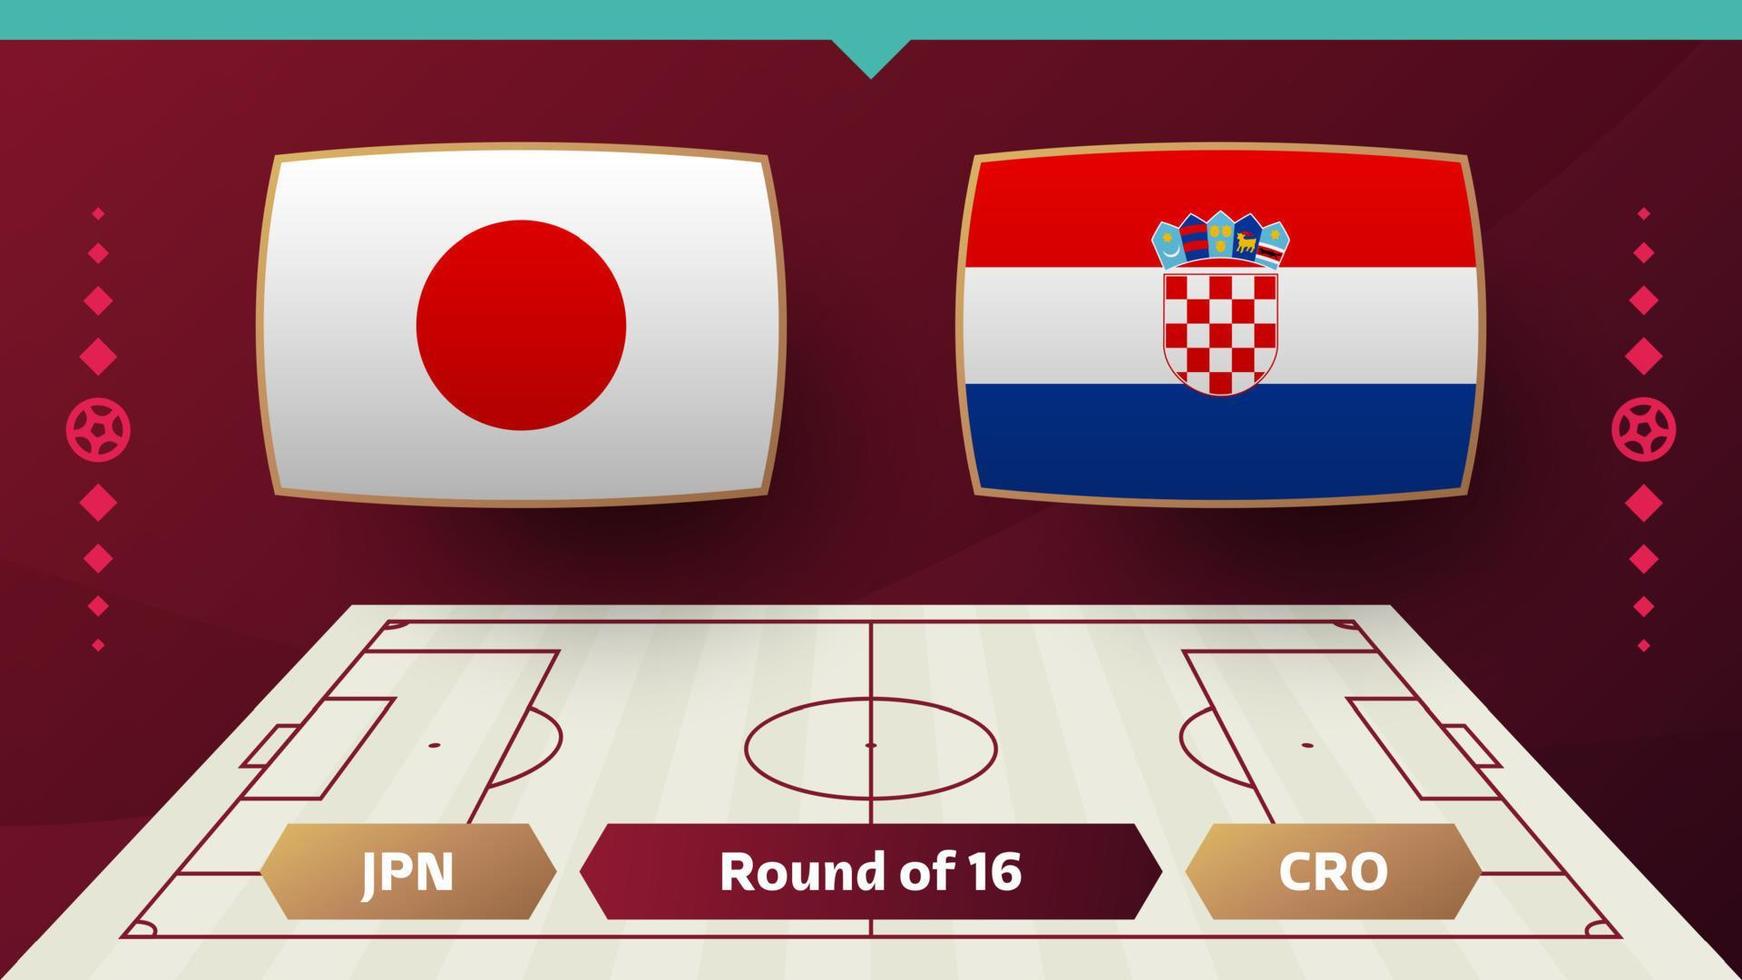 japan croatia playoff round of 16 match Football 2022. 2022 World Football championship match versus teams intro sport background, championship competition poster, vector illustration